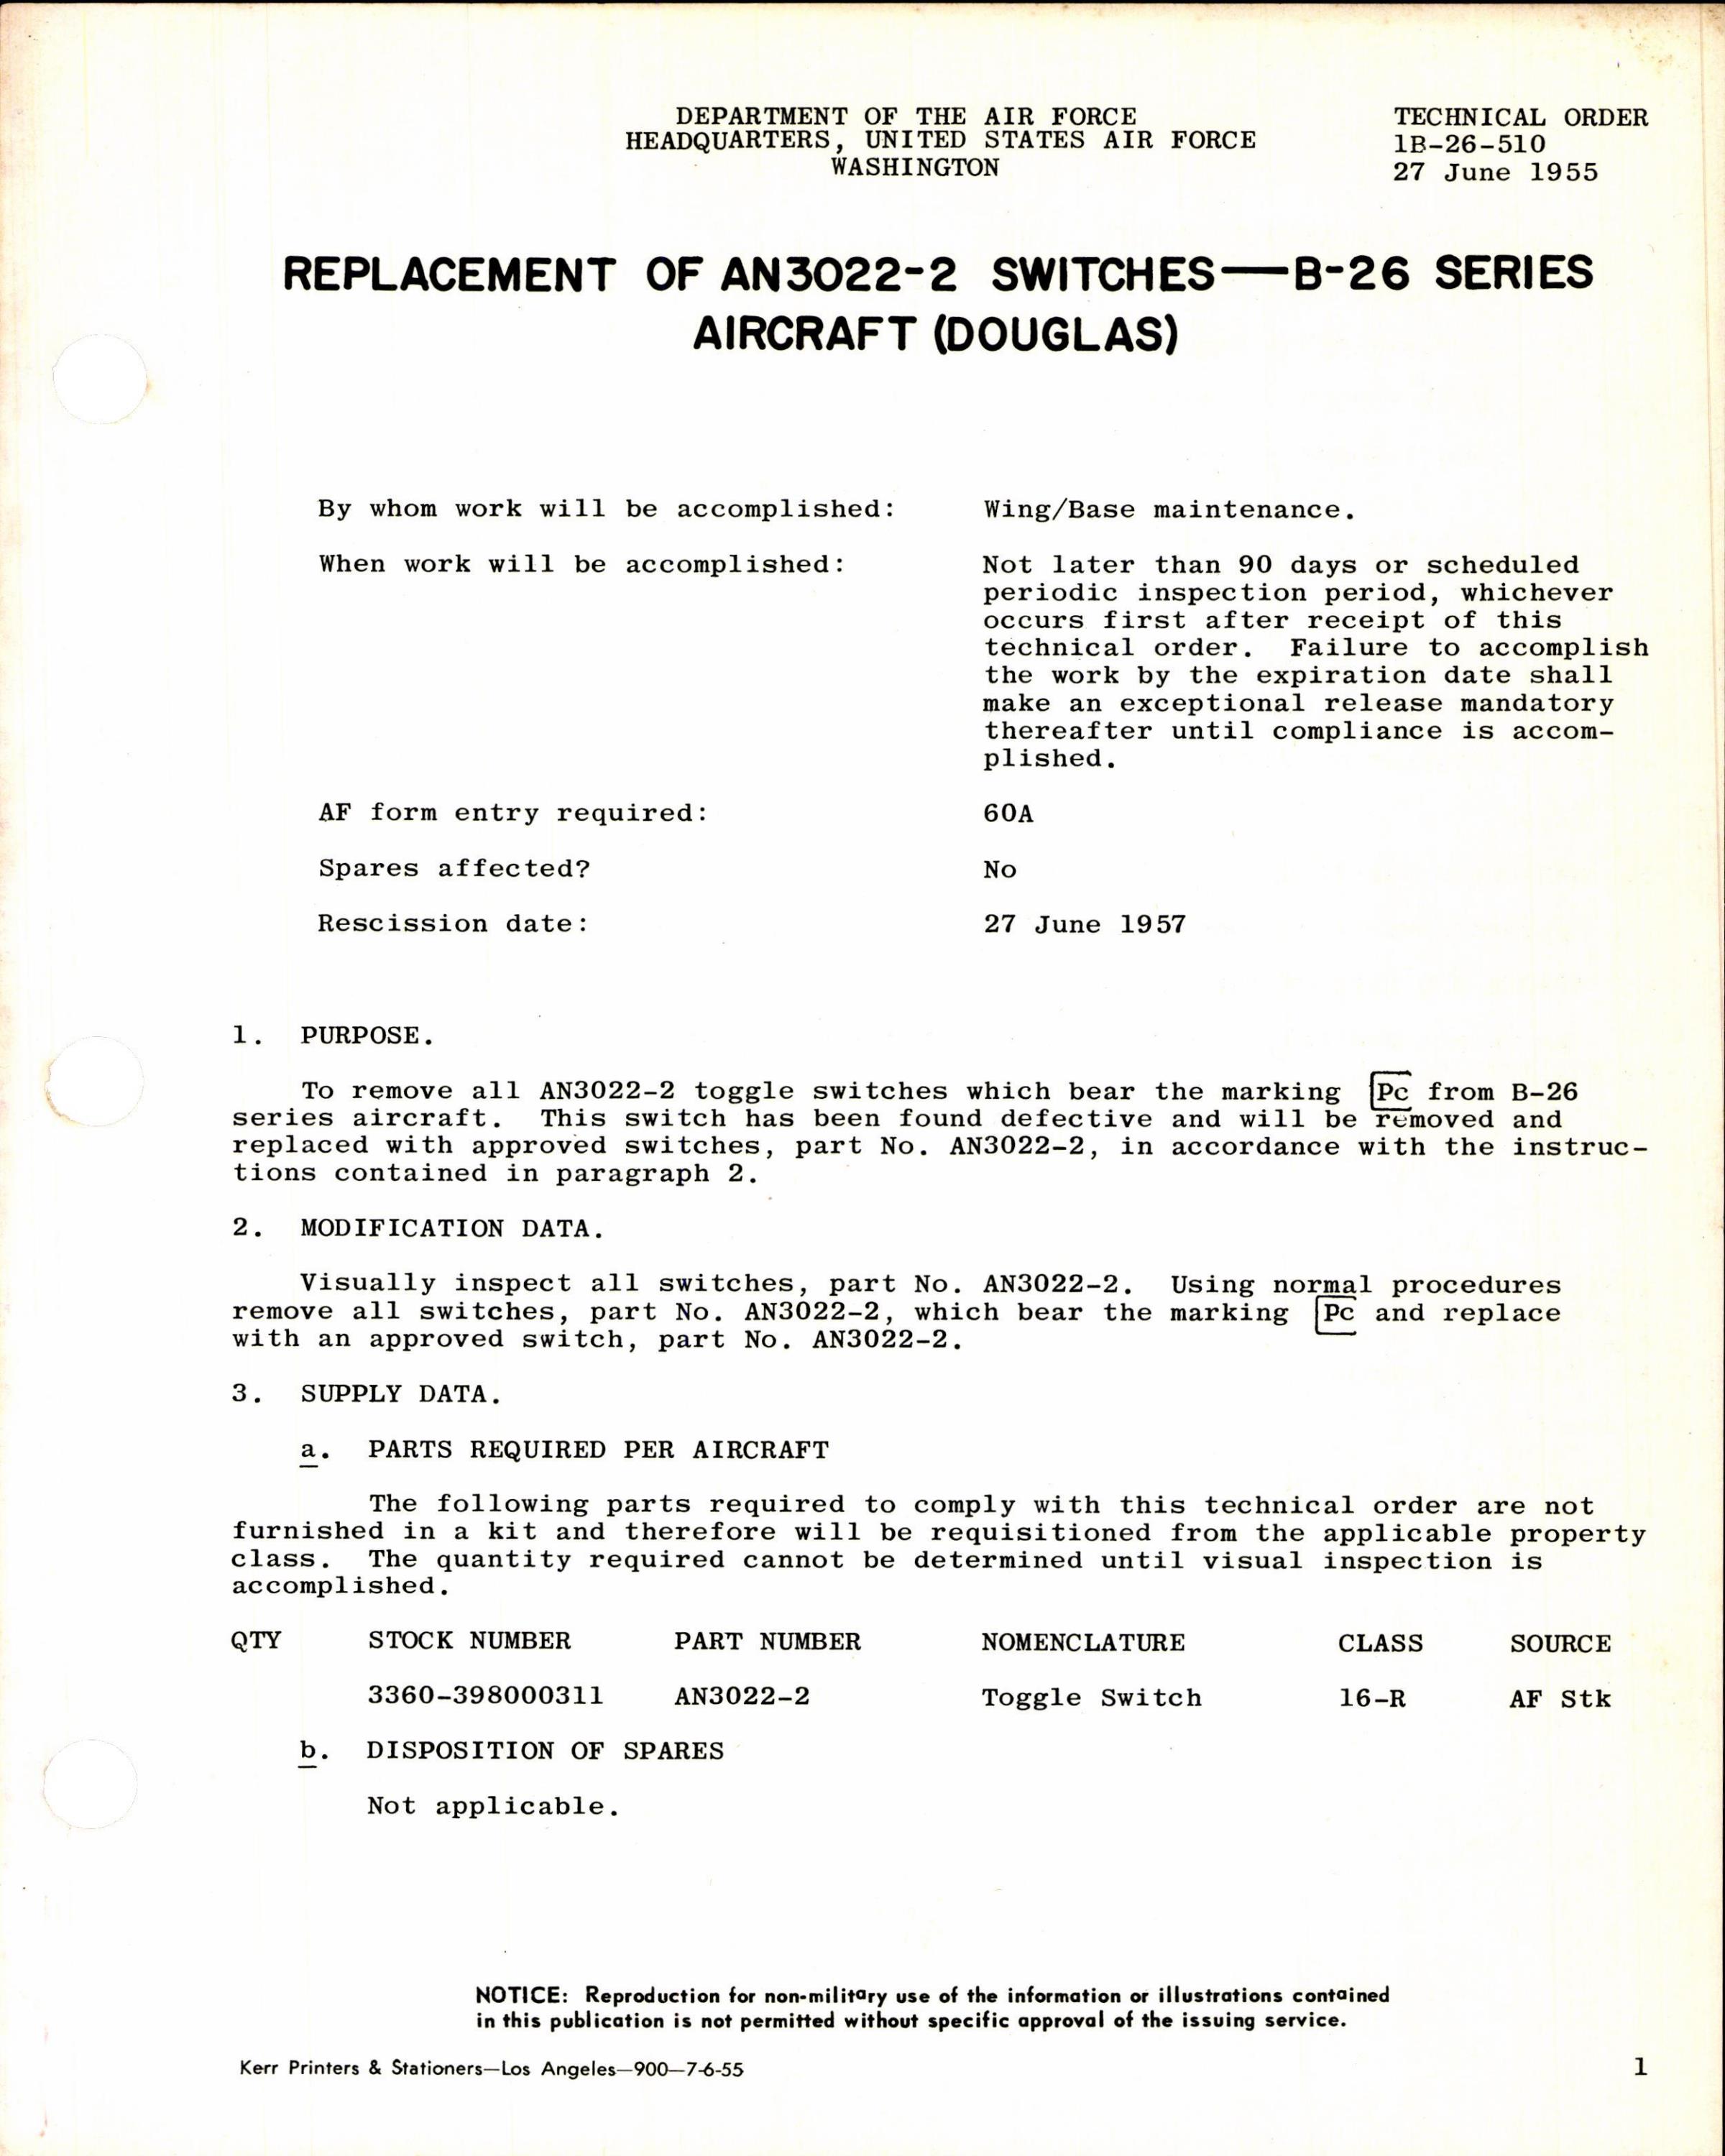 Sample page 1 from AirCorps Library document: Replacement of AN3022-2 Switches for B-26 Series Aircraft